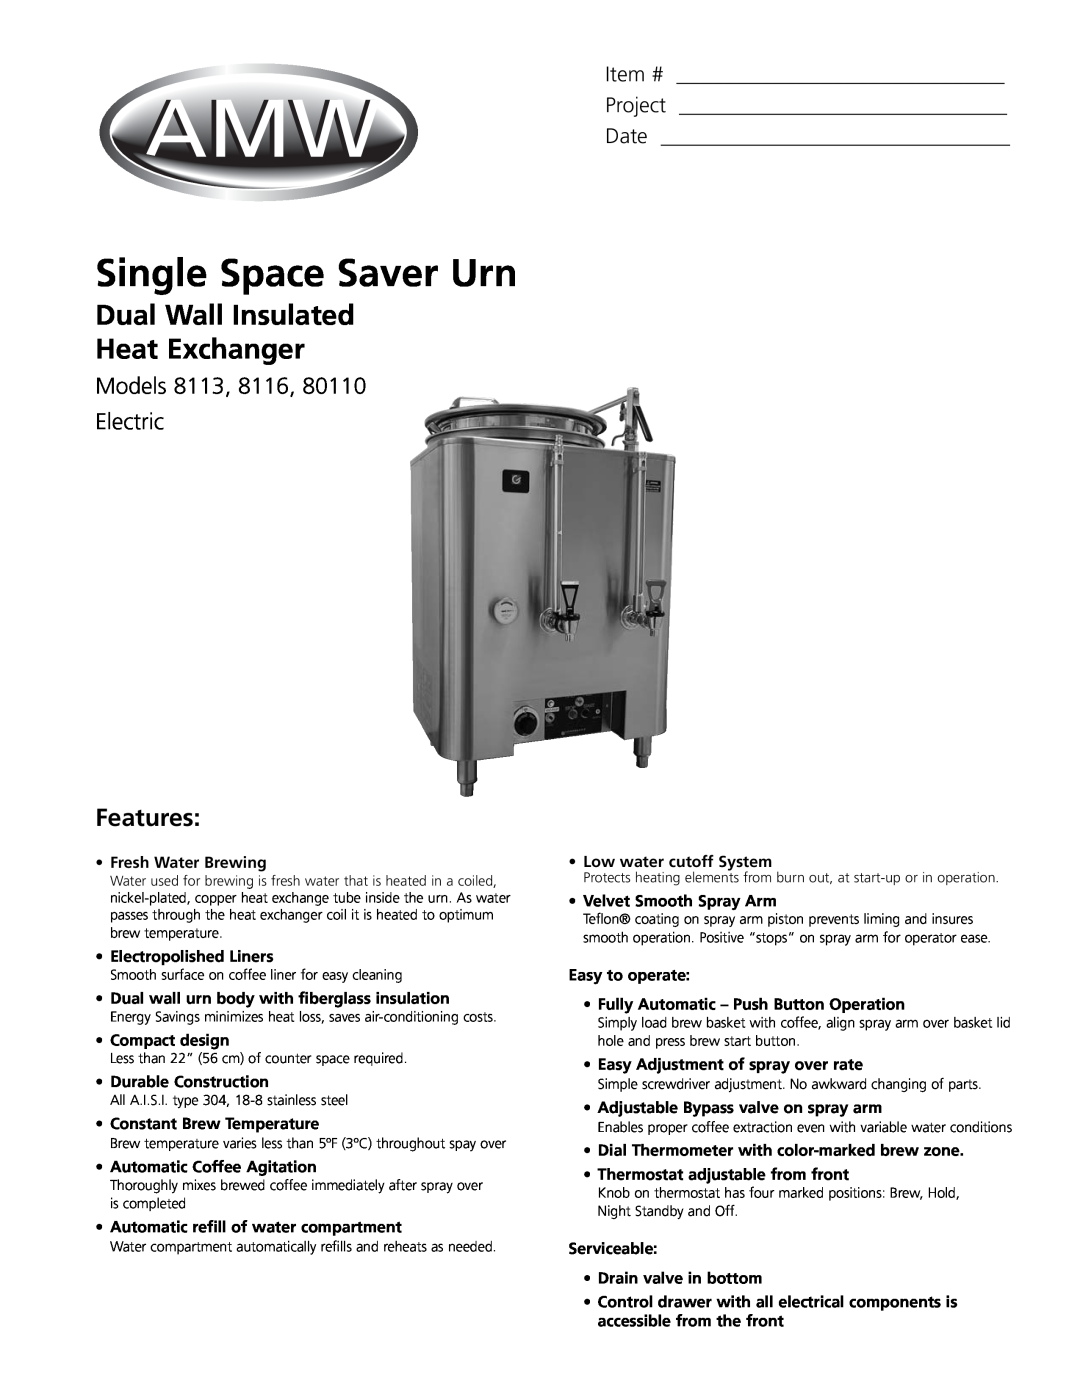 Grindmaster manual Single Space Saver Urn, Dual Wall Insulated Heat Exchanger, Features, Models 8113, 8116, Electric 